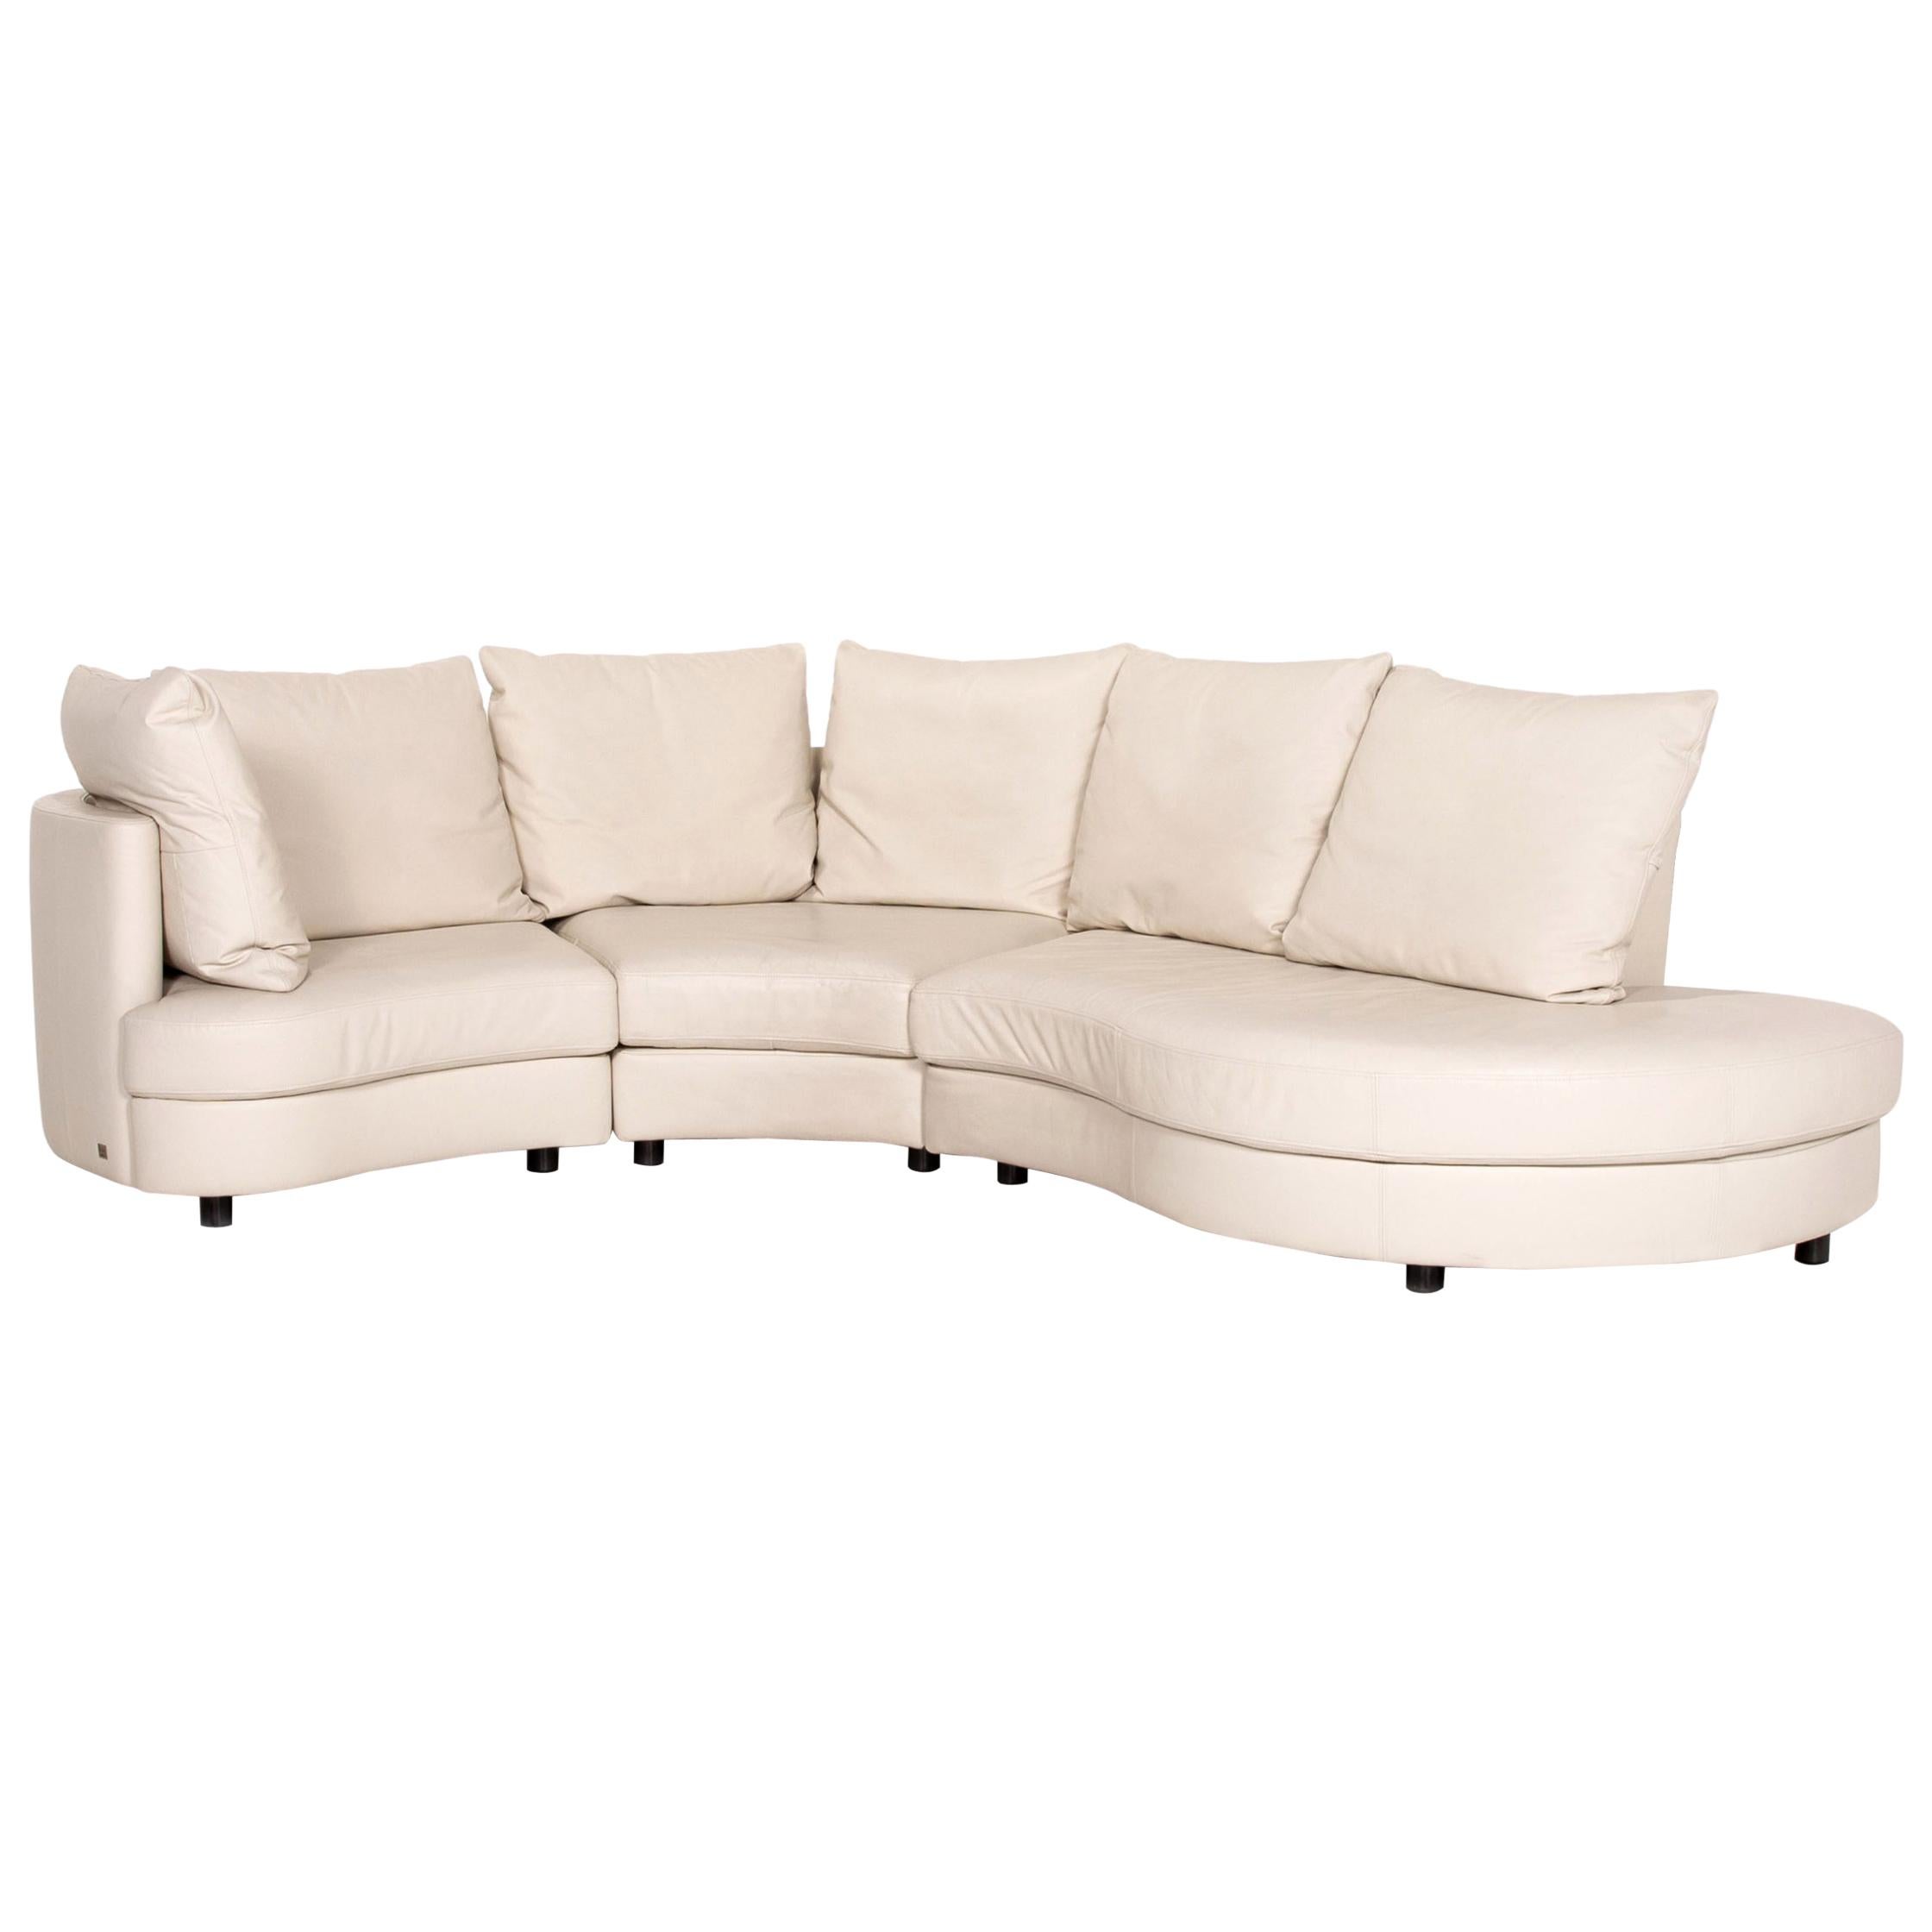 Rolf Benz Leather Corner Sofa Cream Sofa Couch For Sale